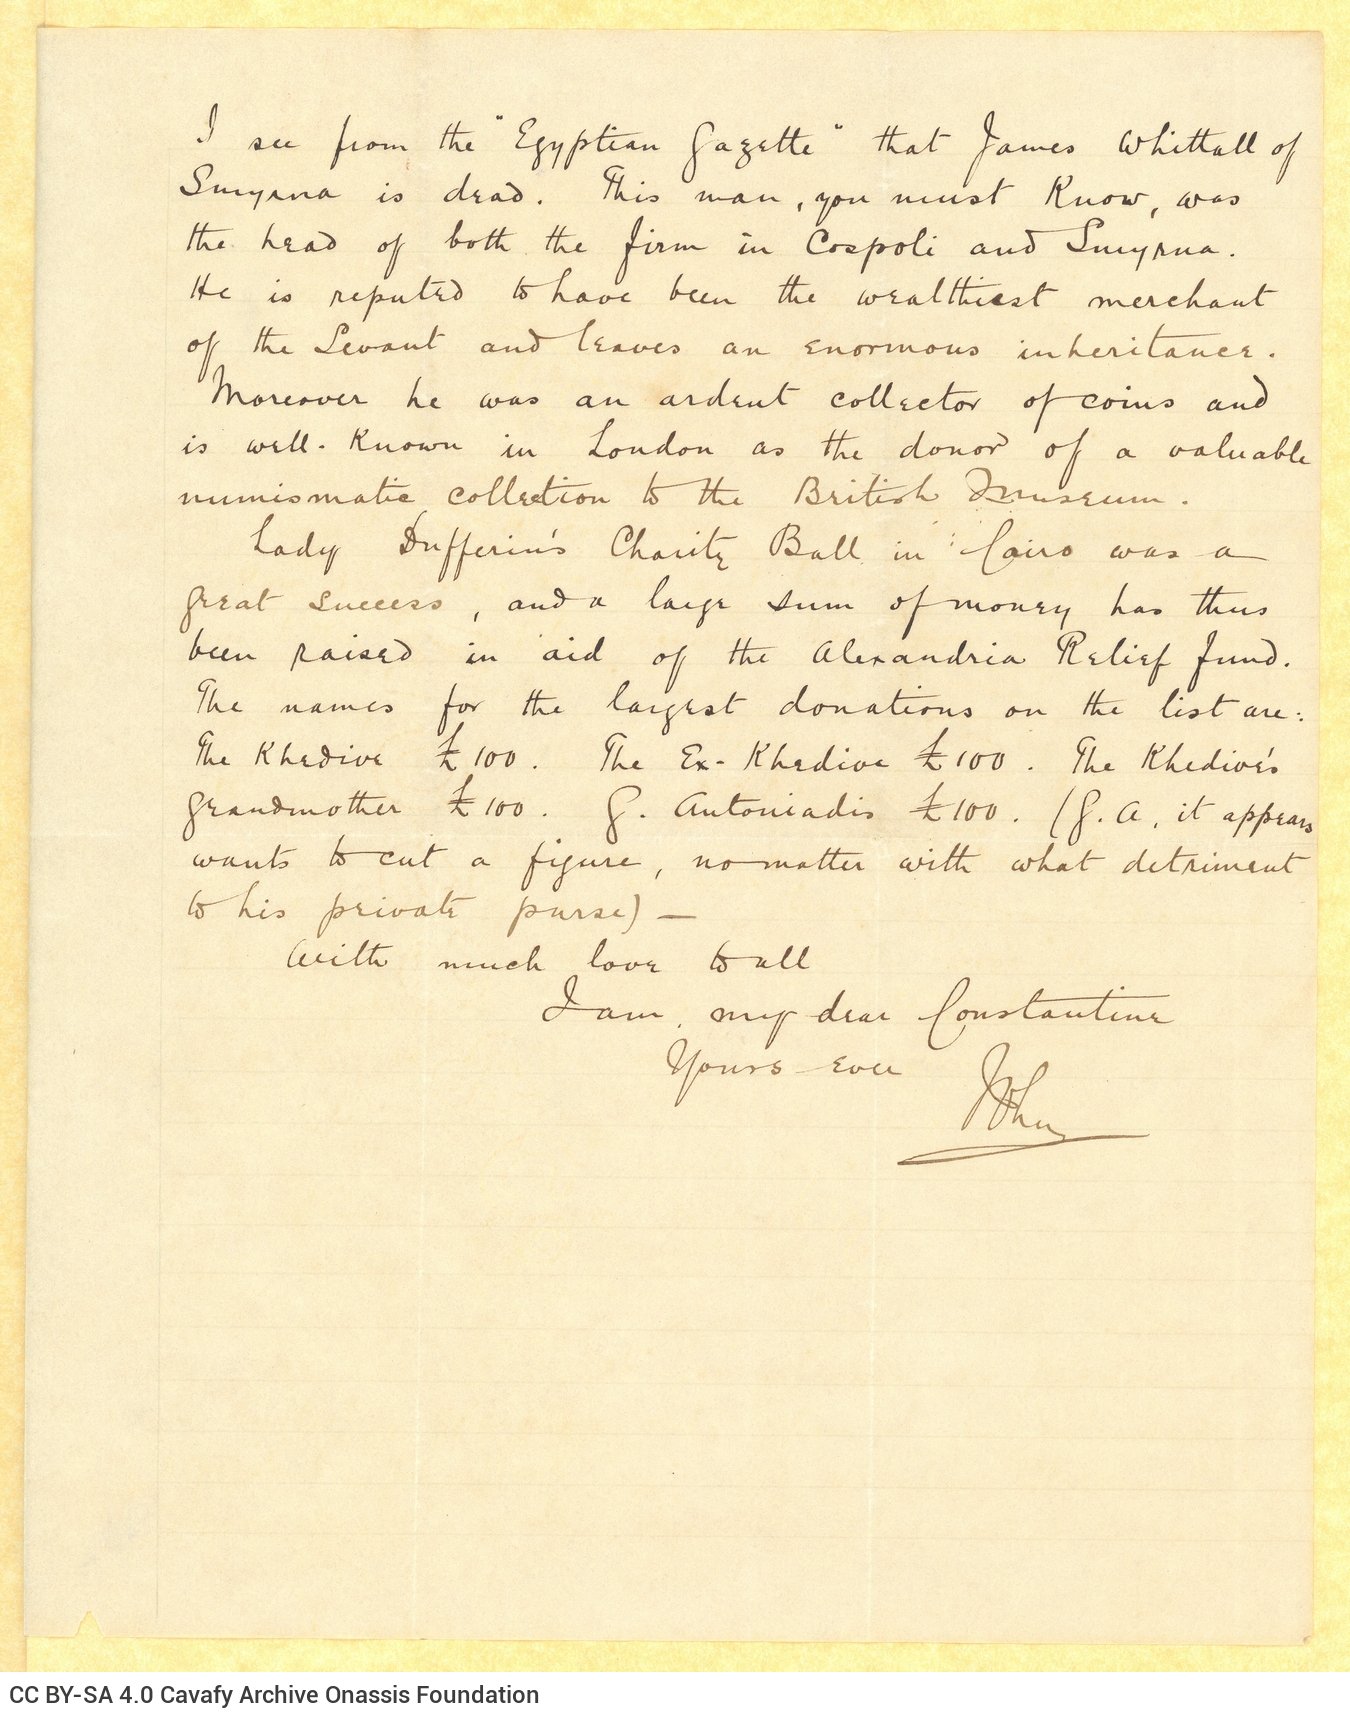 Handwritten letter by John Cavafy to C. P. Cavafy, on the first and third pages of a double sheet notepaper of R. J. Moss & C